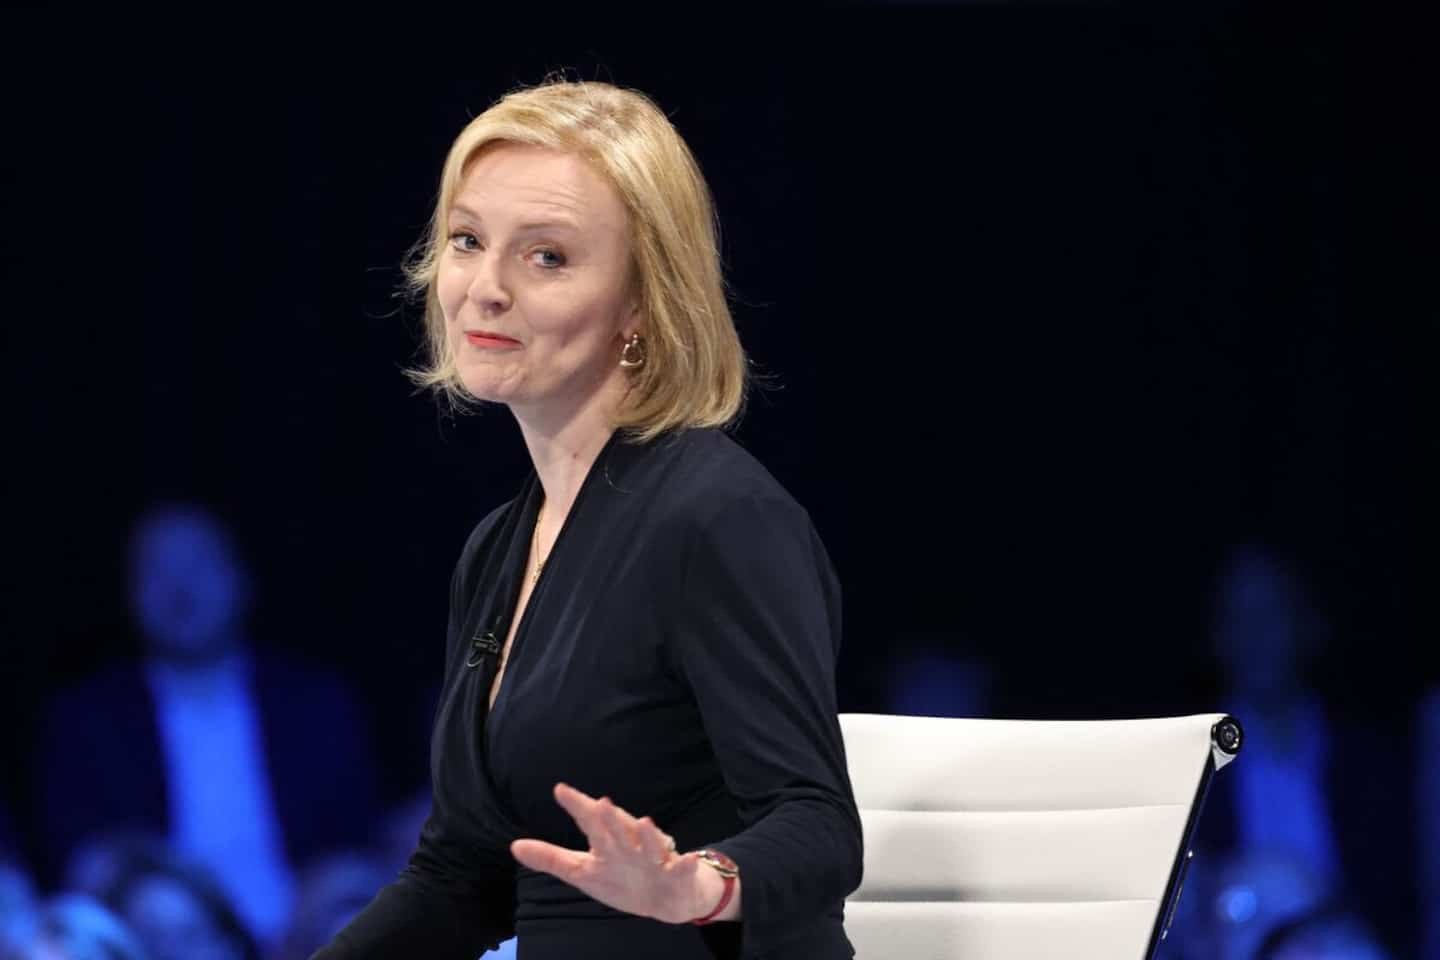 Race to Downing Street: Liz Truss' remarks sow discord